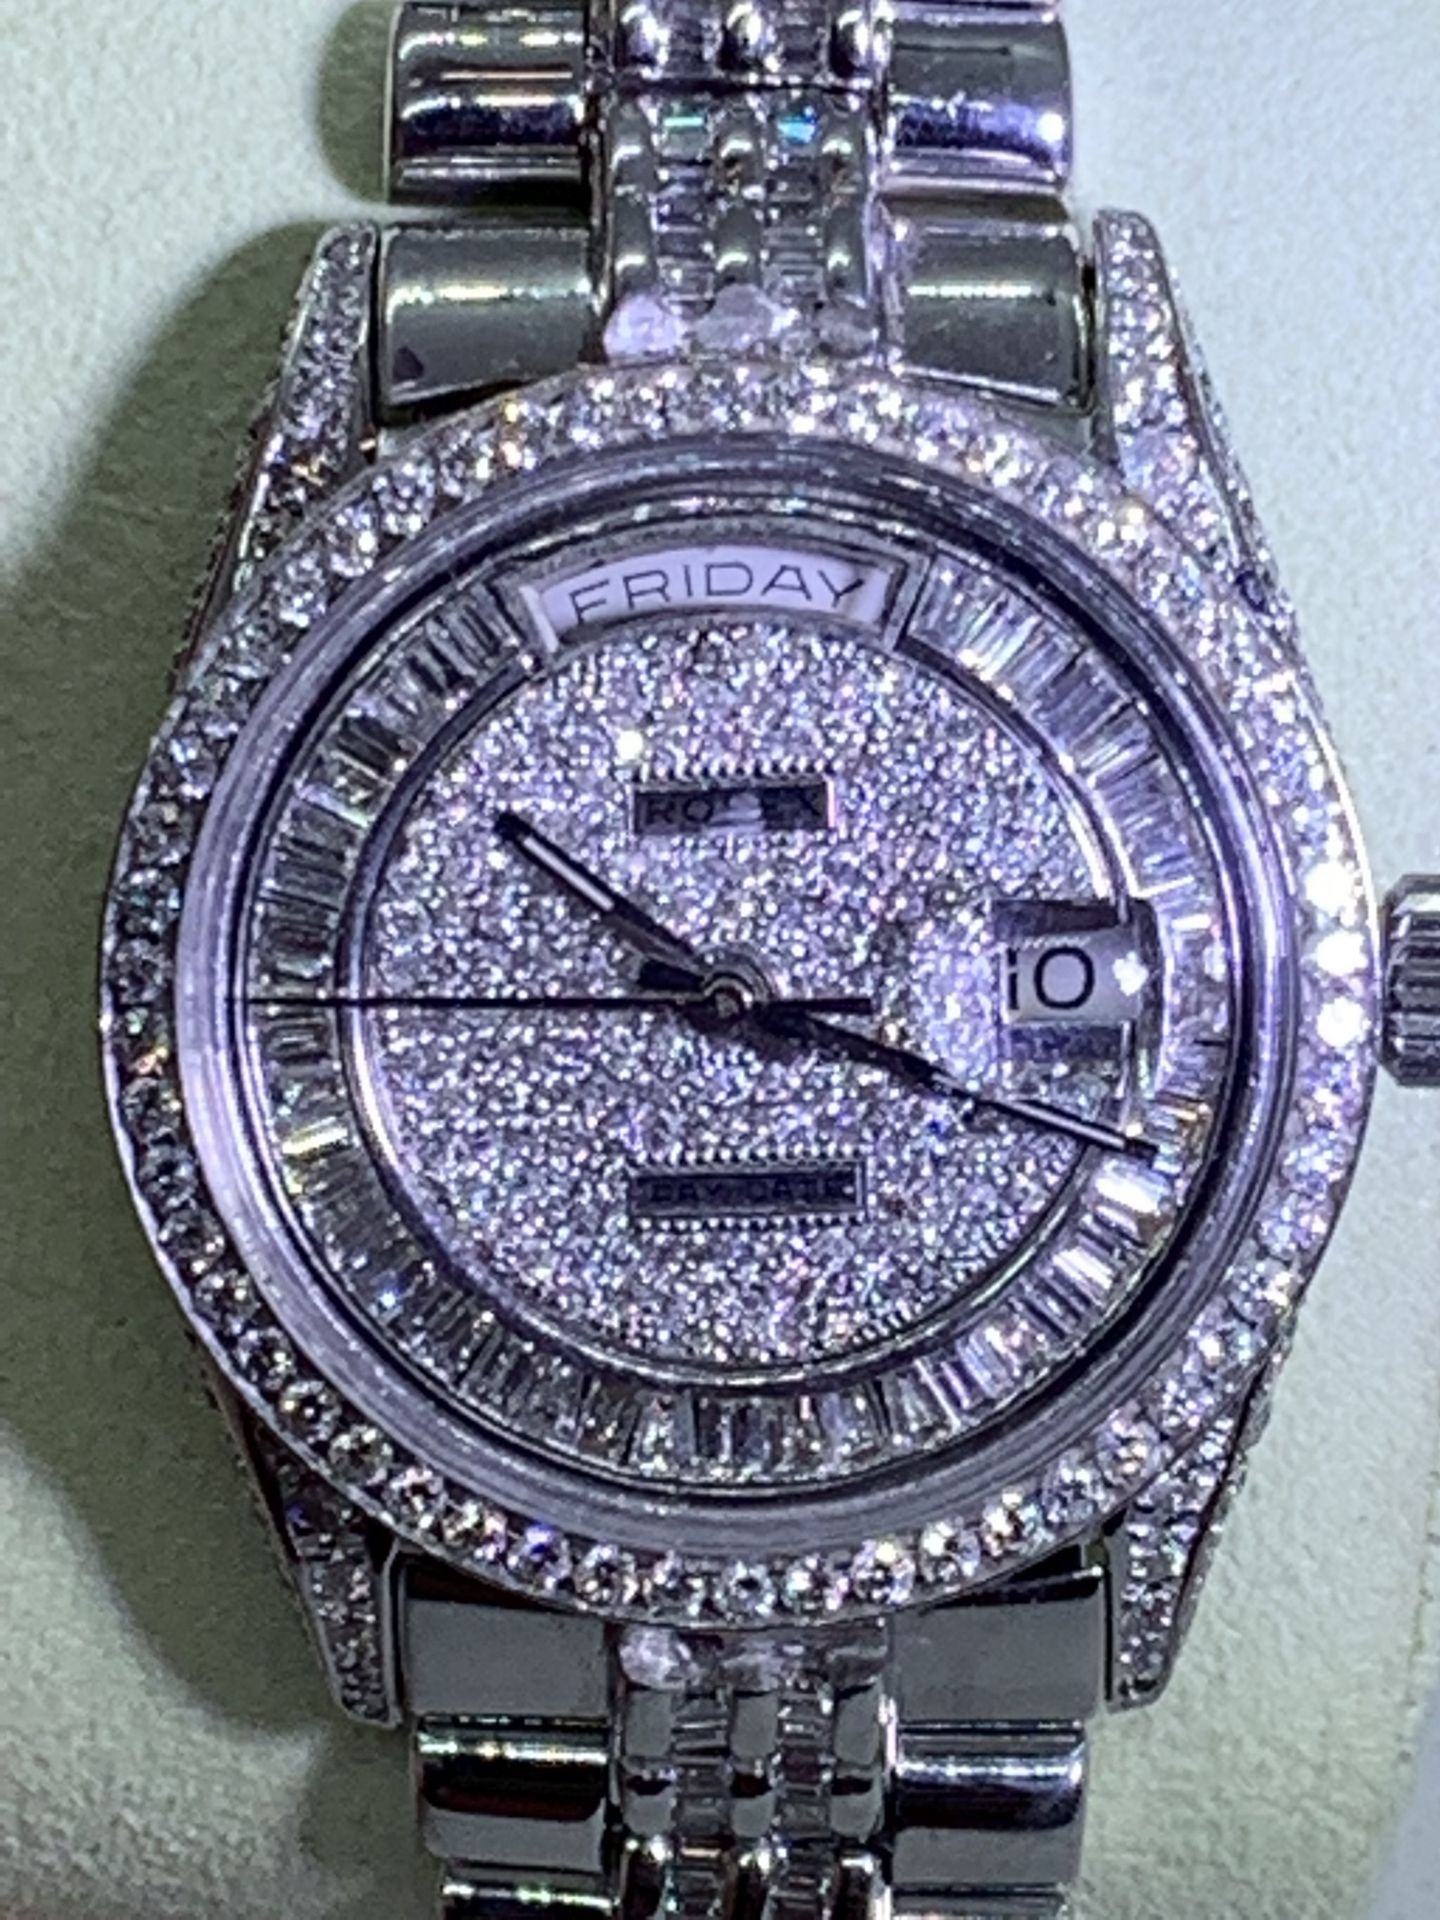 Diamond Encrusted Mens 36mm Day-Date, Solid White Gold - Diamond/ “Super President” Marked ROLEX - Image 18 of 18